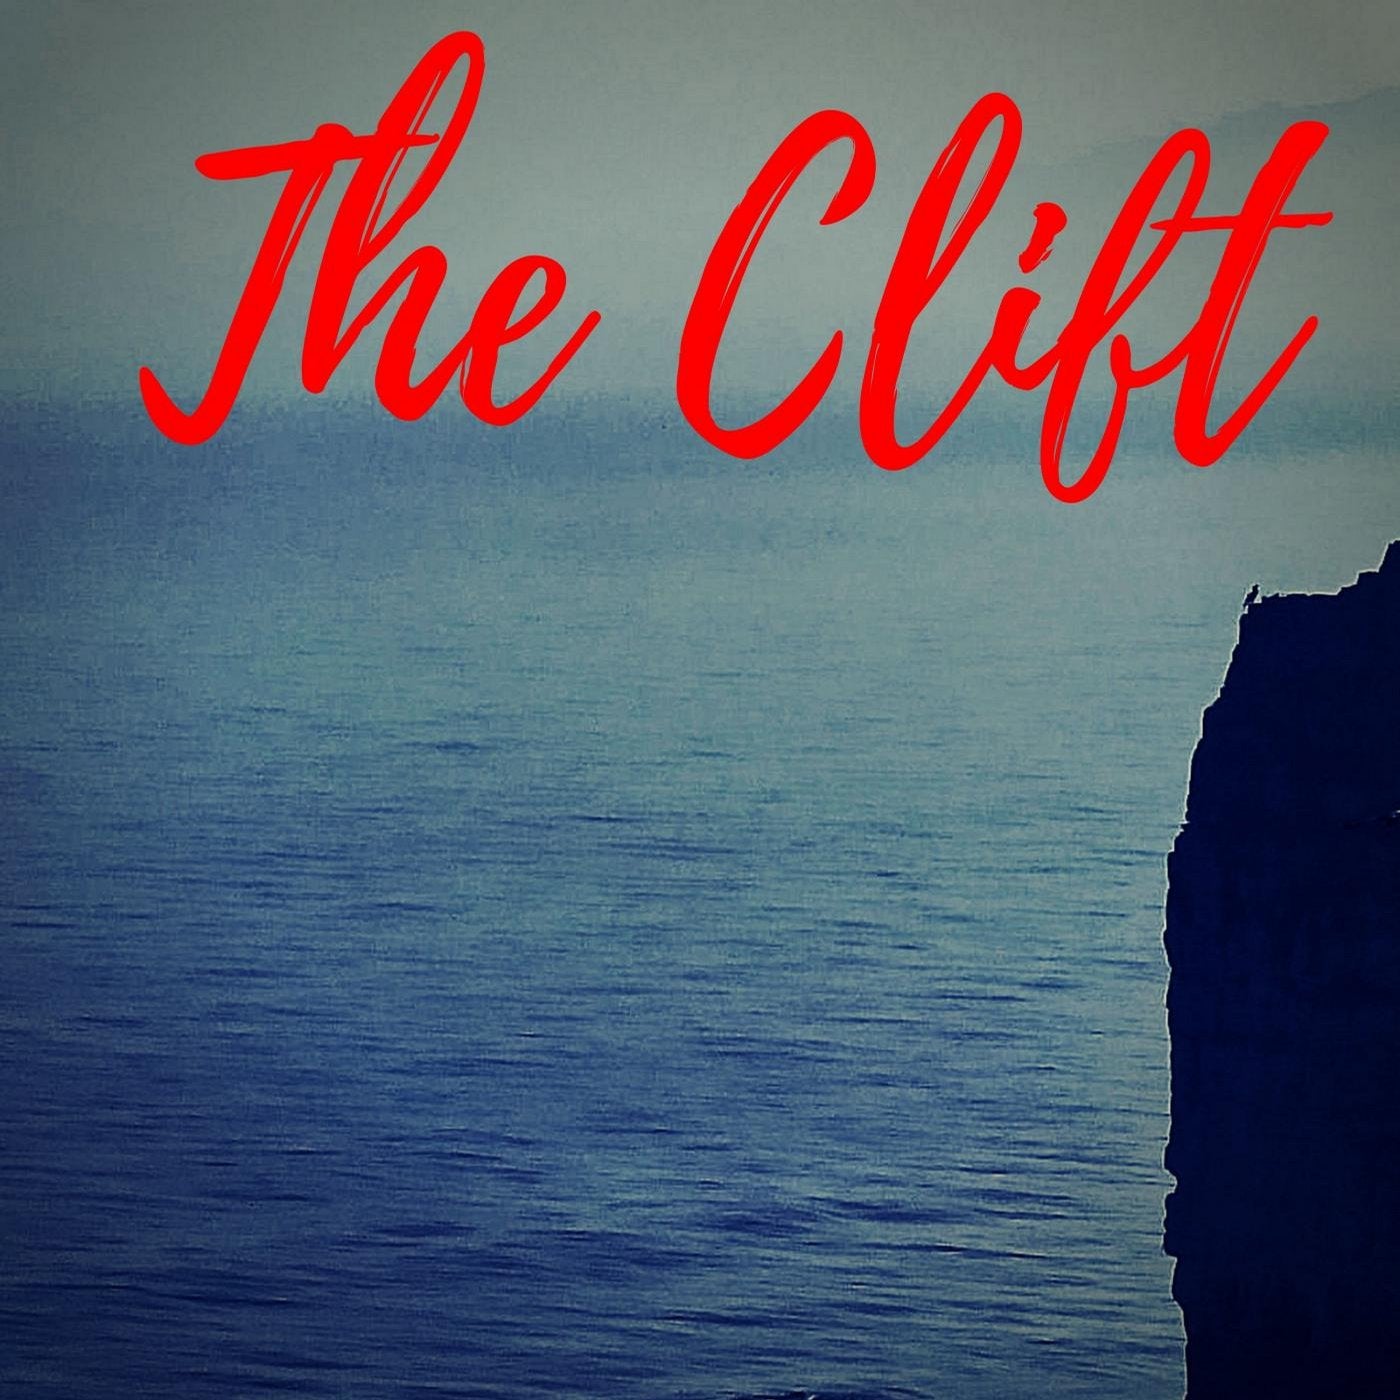 The Clift